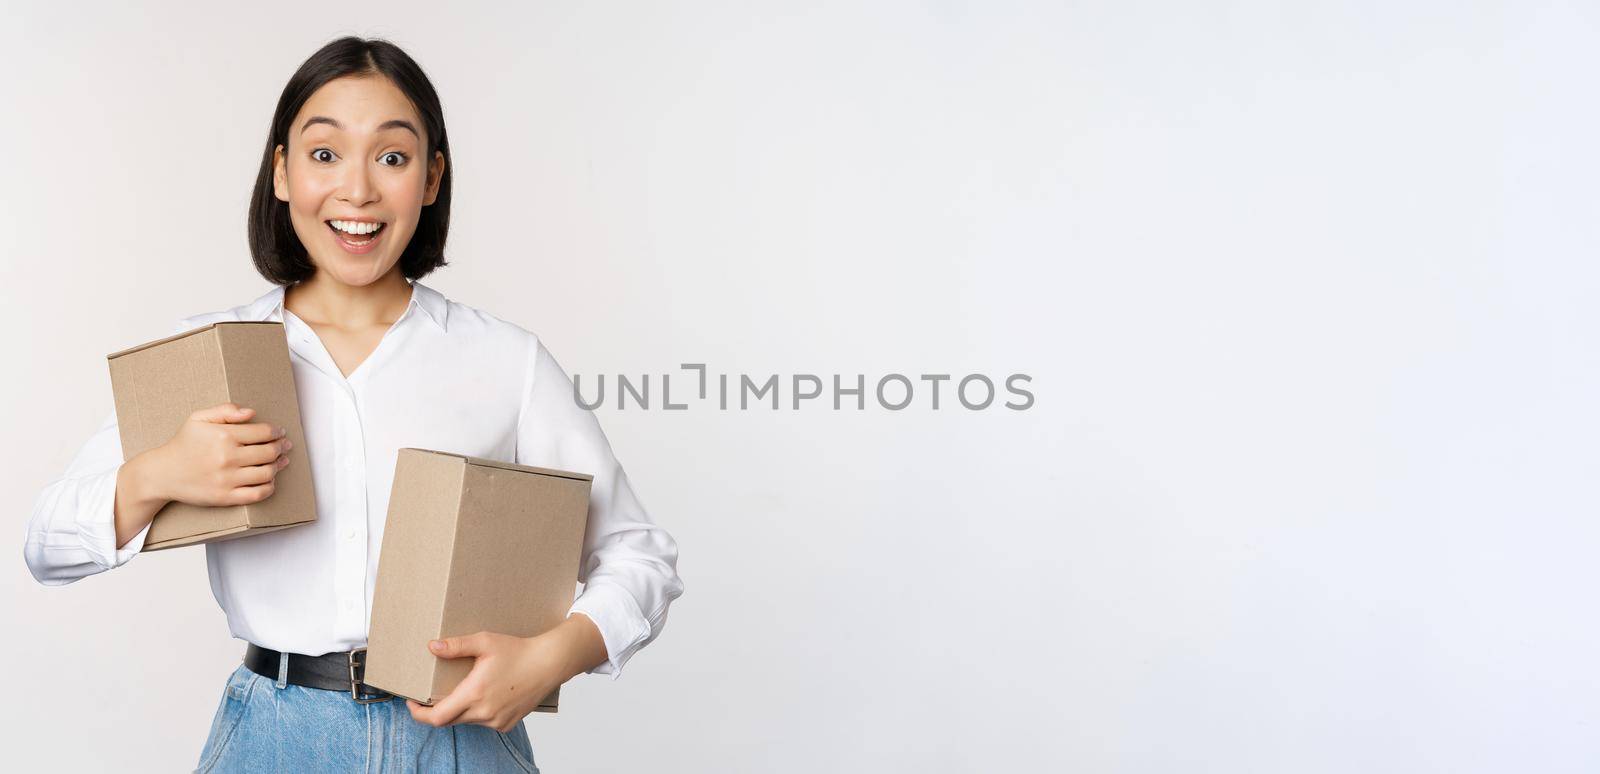 Portrait of happy korean girl holding two boxes and smiling, lookng amazed at camera, concept of shopping, white background.